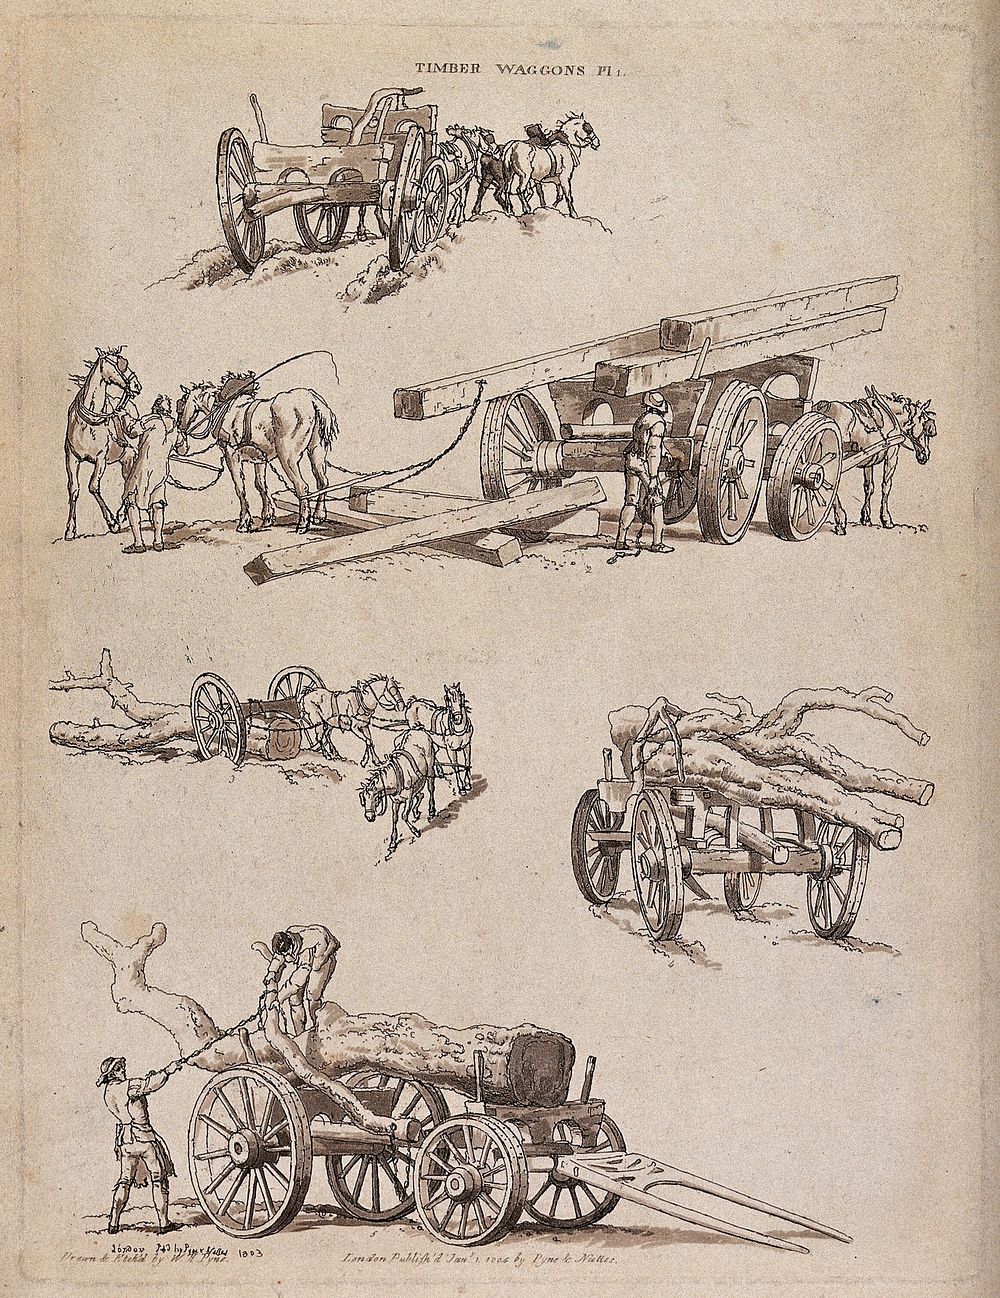 Men loading timber on to wagons, and horses pulling the wagons. Etching with aquatint by W.H. Pyne, 1804.